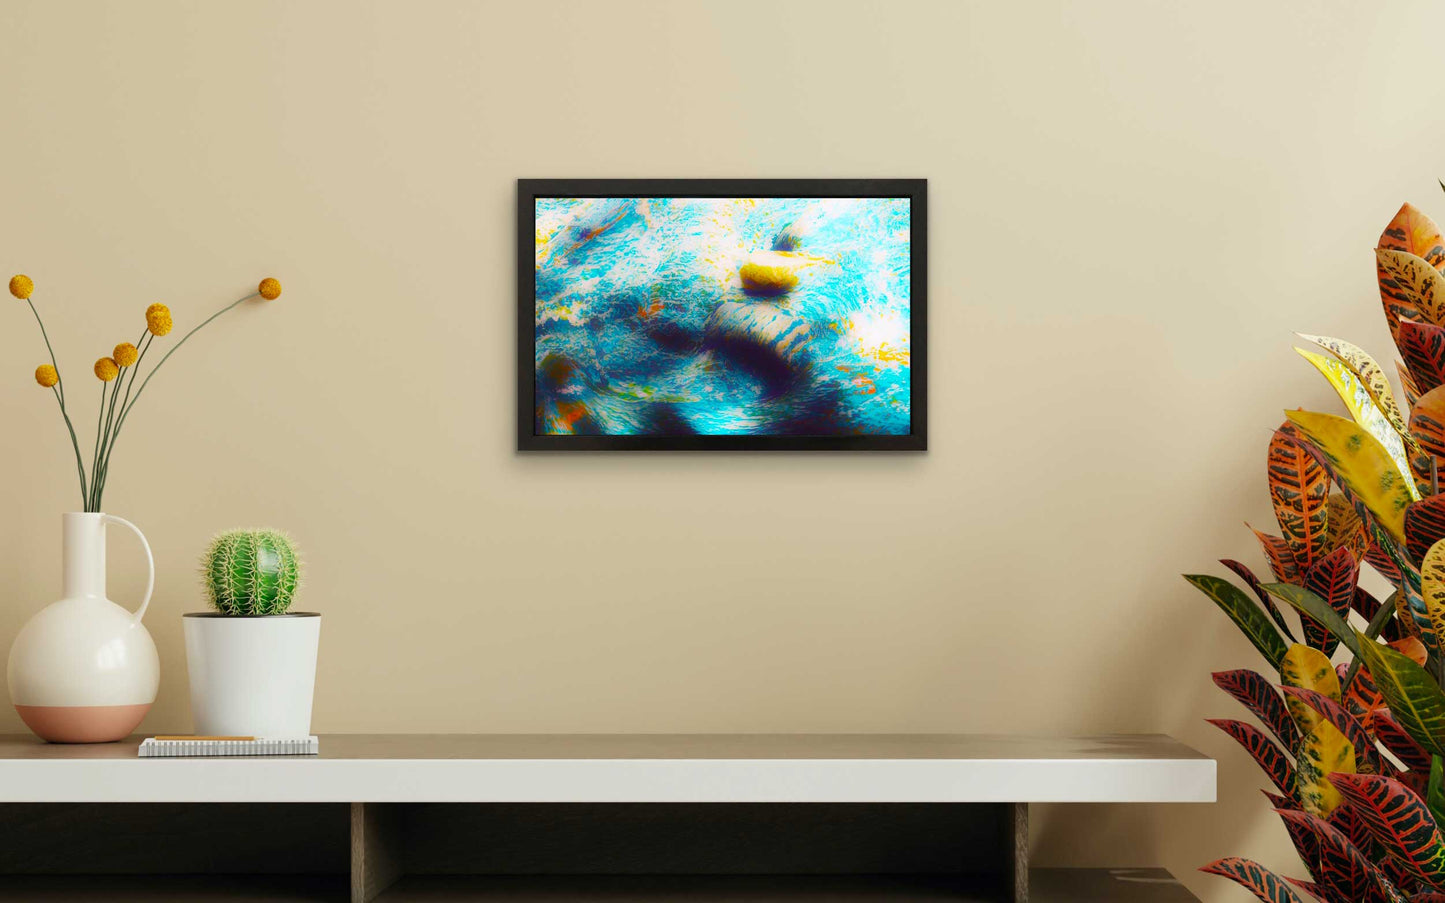 The movement in the water, the color of rocks and shells are great inspirations for photography.  Photograph measuring 10.5 x 16.5 inches, resin-coated in a handmade black wooden frame 12 x 18 inches. This frame is ready to install in your new decor.